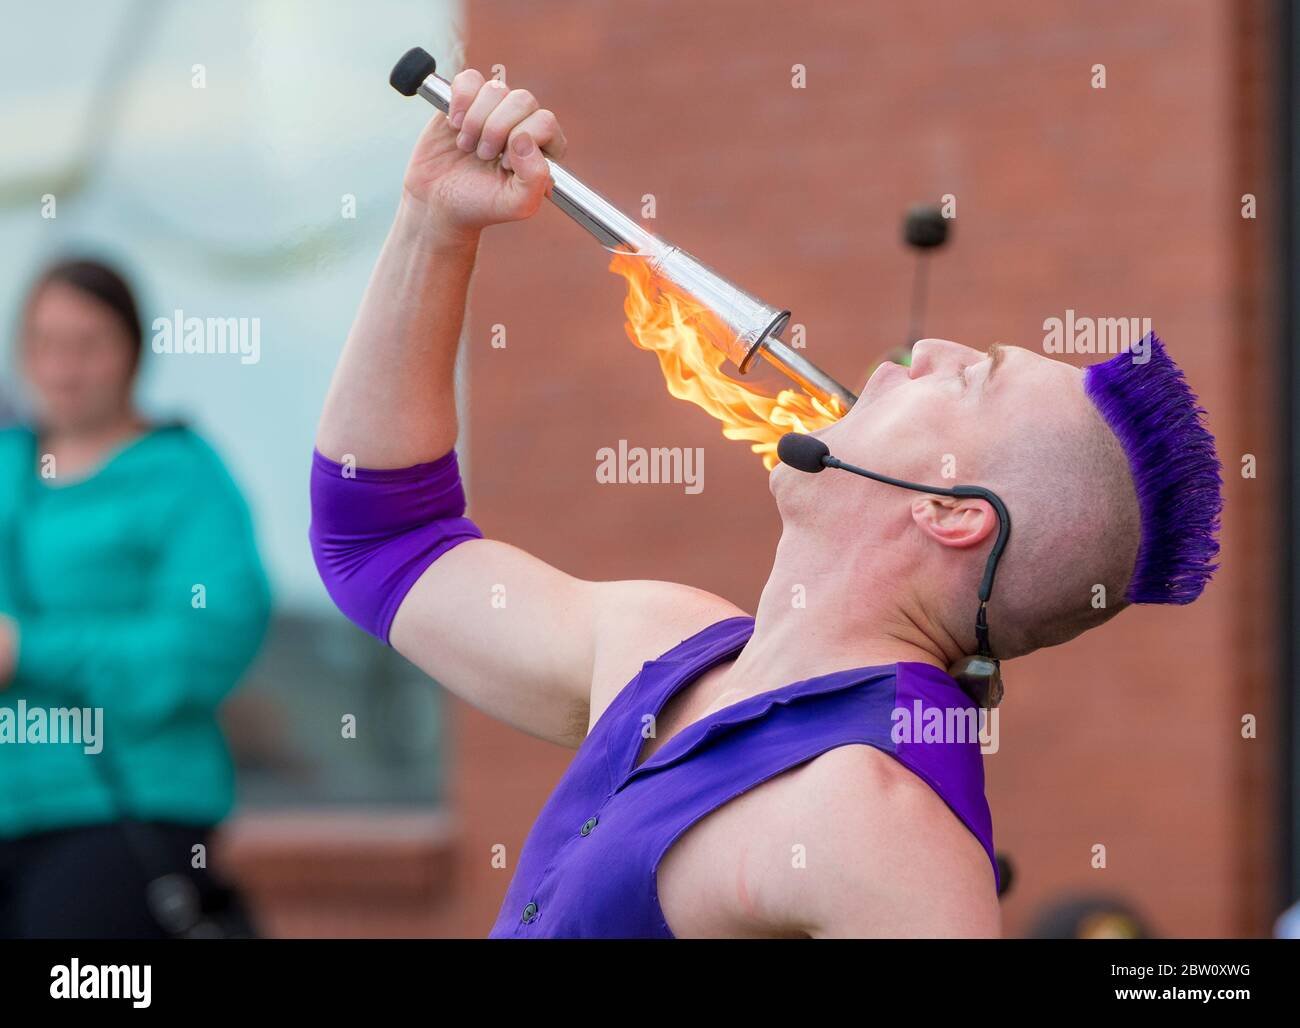 Saint John, New Brunswick, Canada - July 13, 2017: Annual Buskers Festival. A man with purple mohawk hair swallows the end of a burning torch. Stock Photo